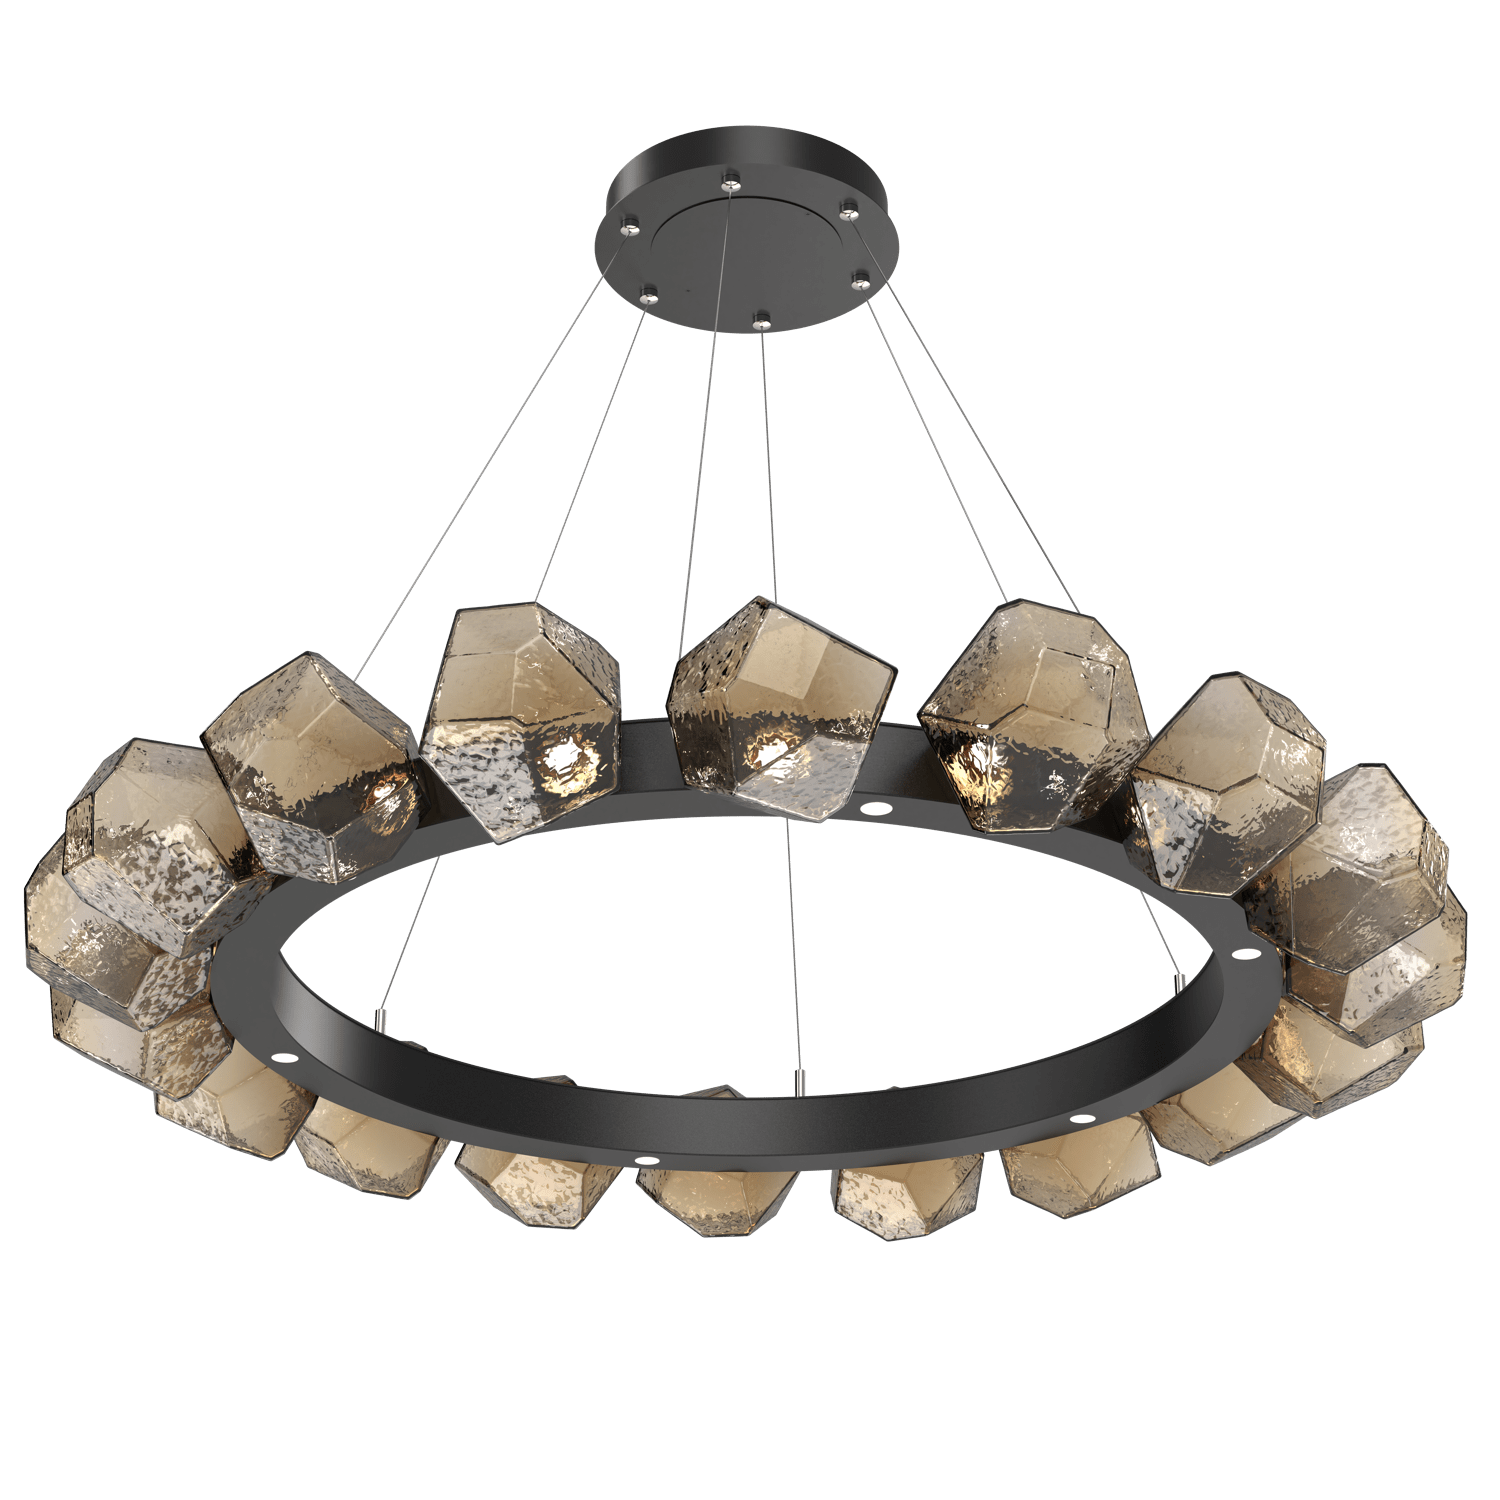 CHB0039-48-MB-B-Hammerton-Studio-Gem-48-inch-radial-ring-chandelier-with-matte-black-finish-and-bronze-blown-glass-shades-and-LED-lamping